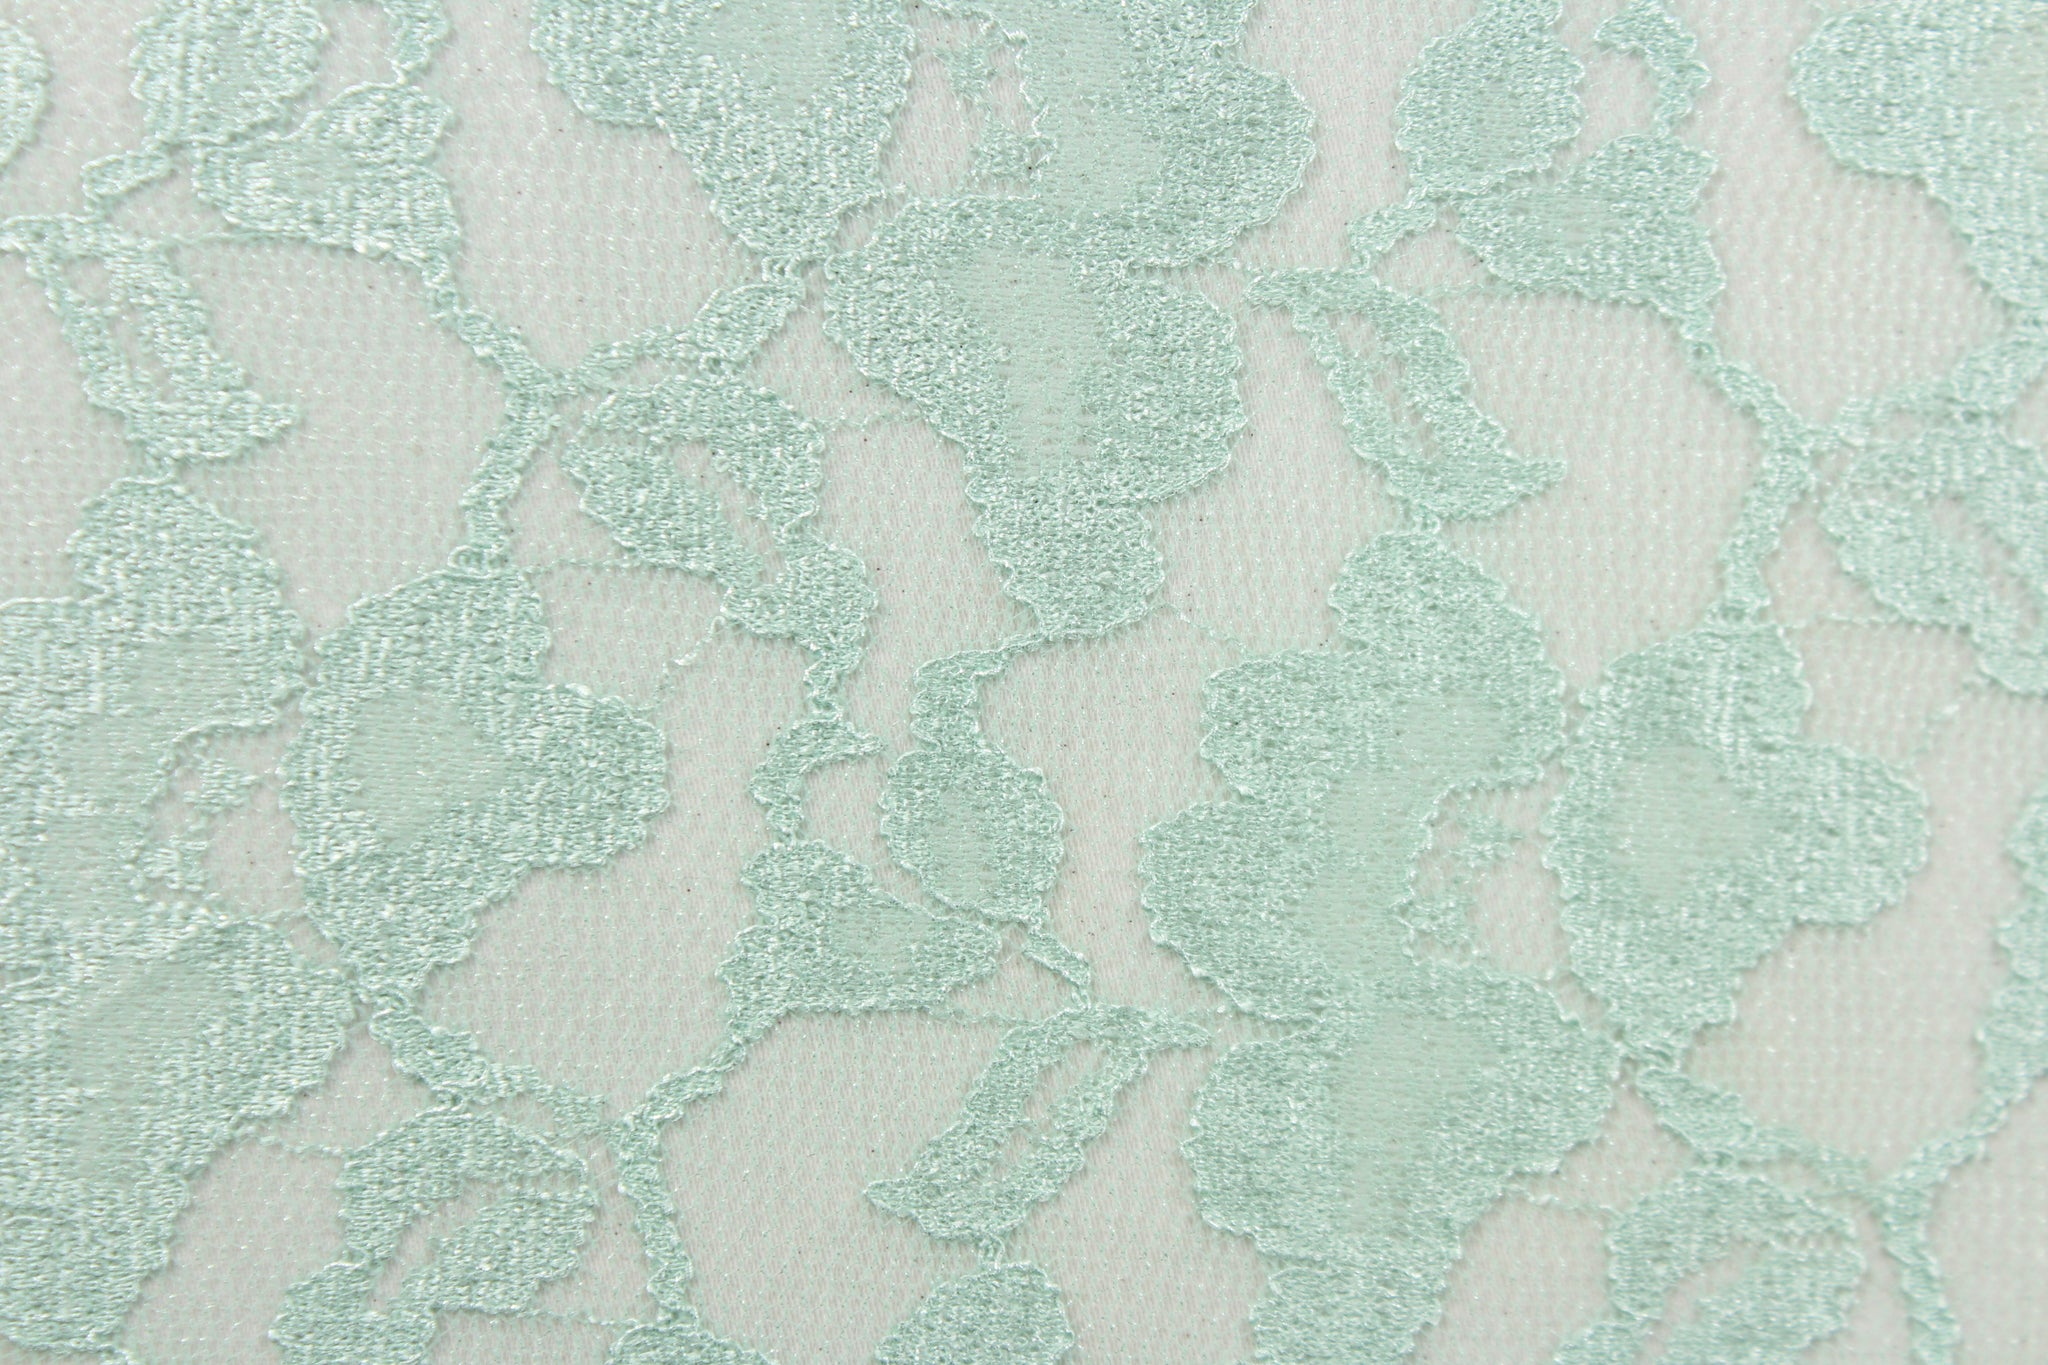 Stretch Lace in Mint Green - All About Fabrics